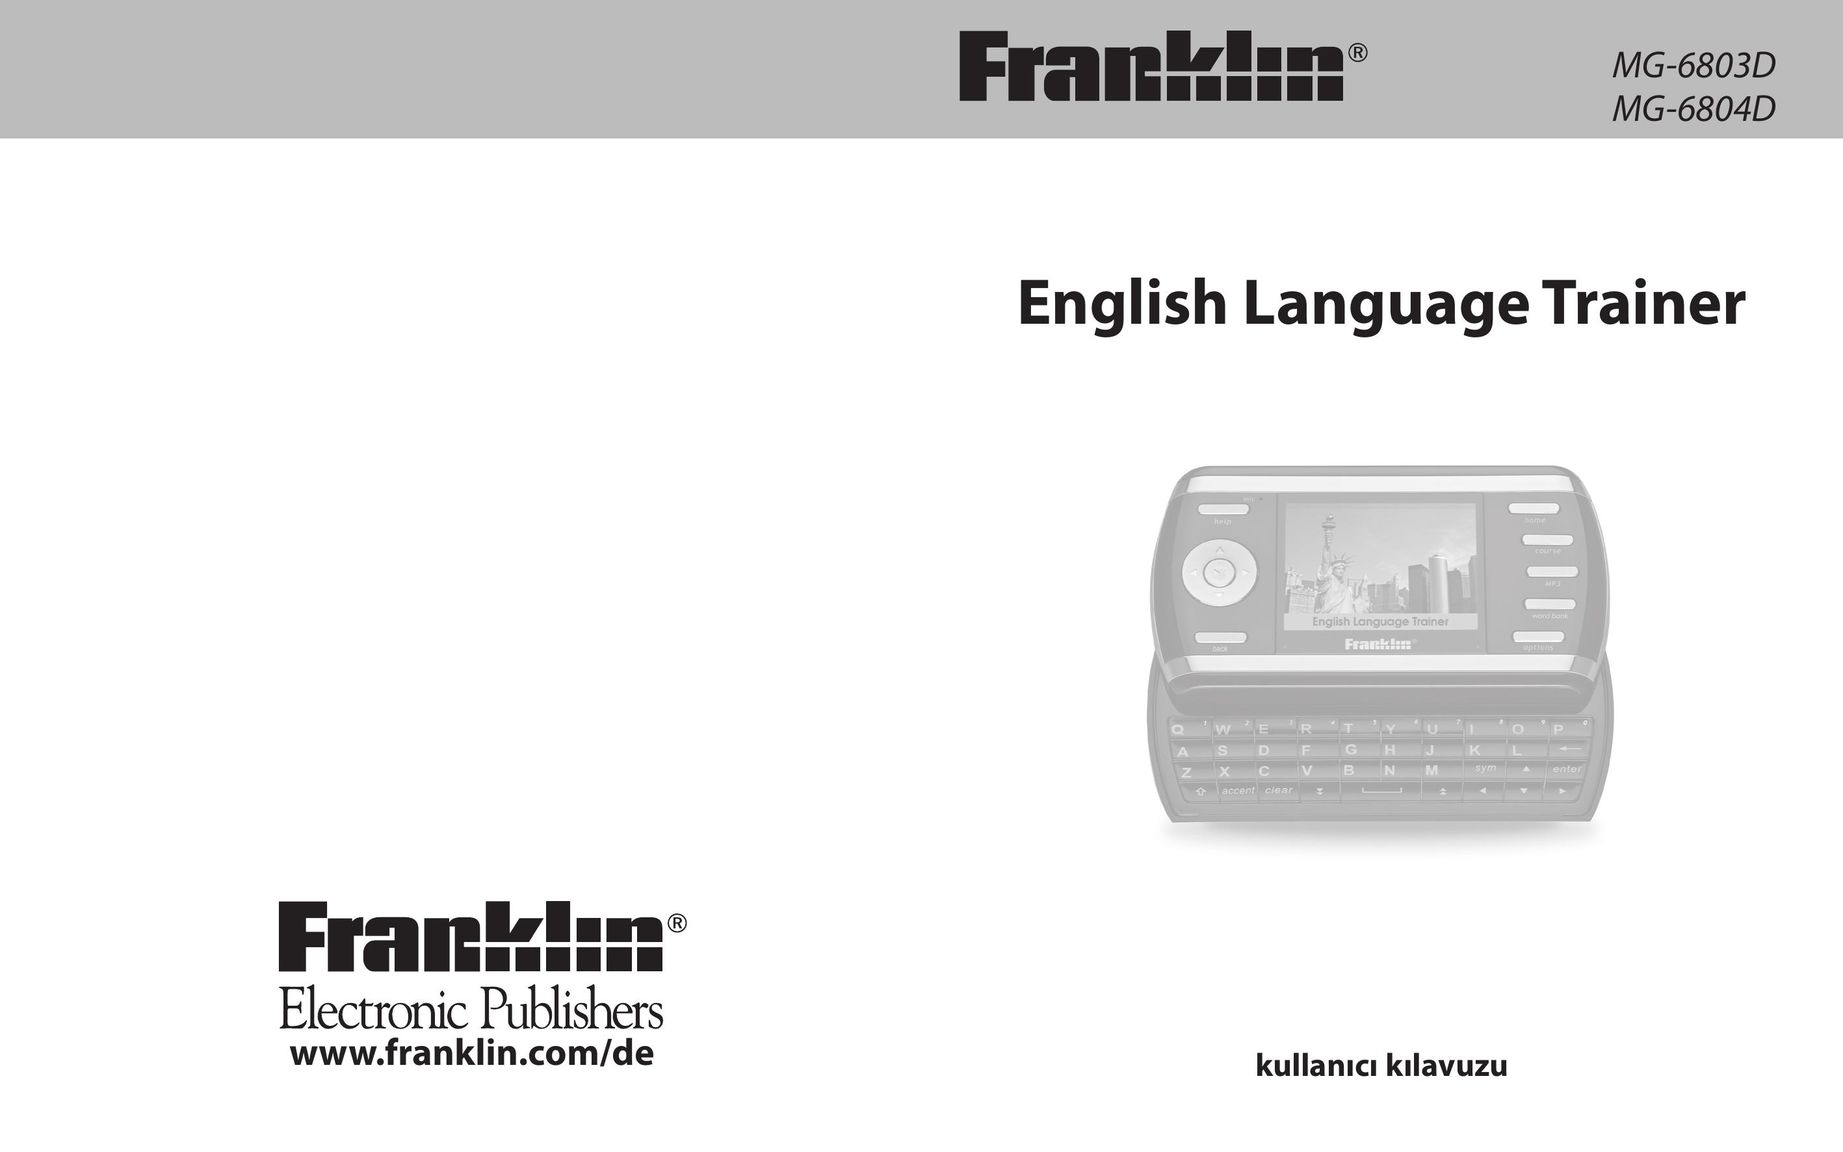 Franklin English Language Trainer Electronic Accessory User Manual